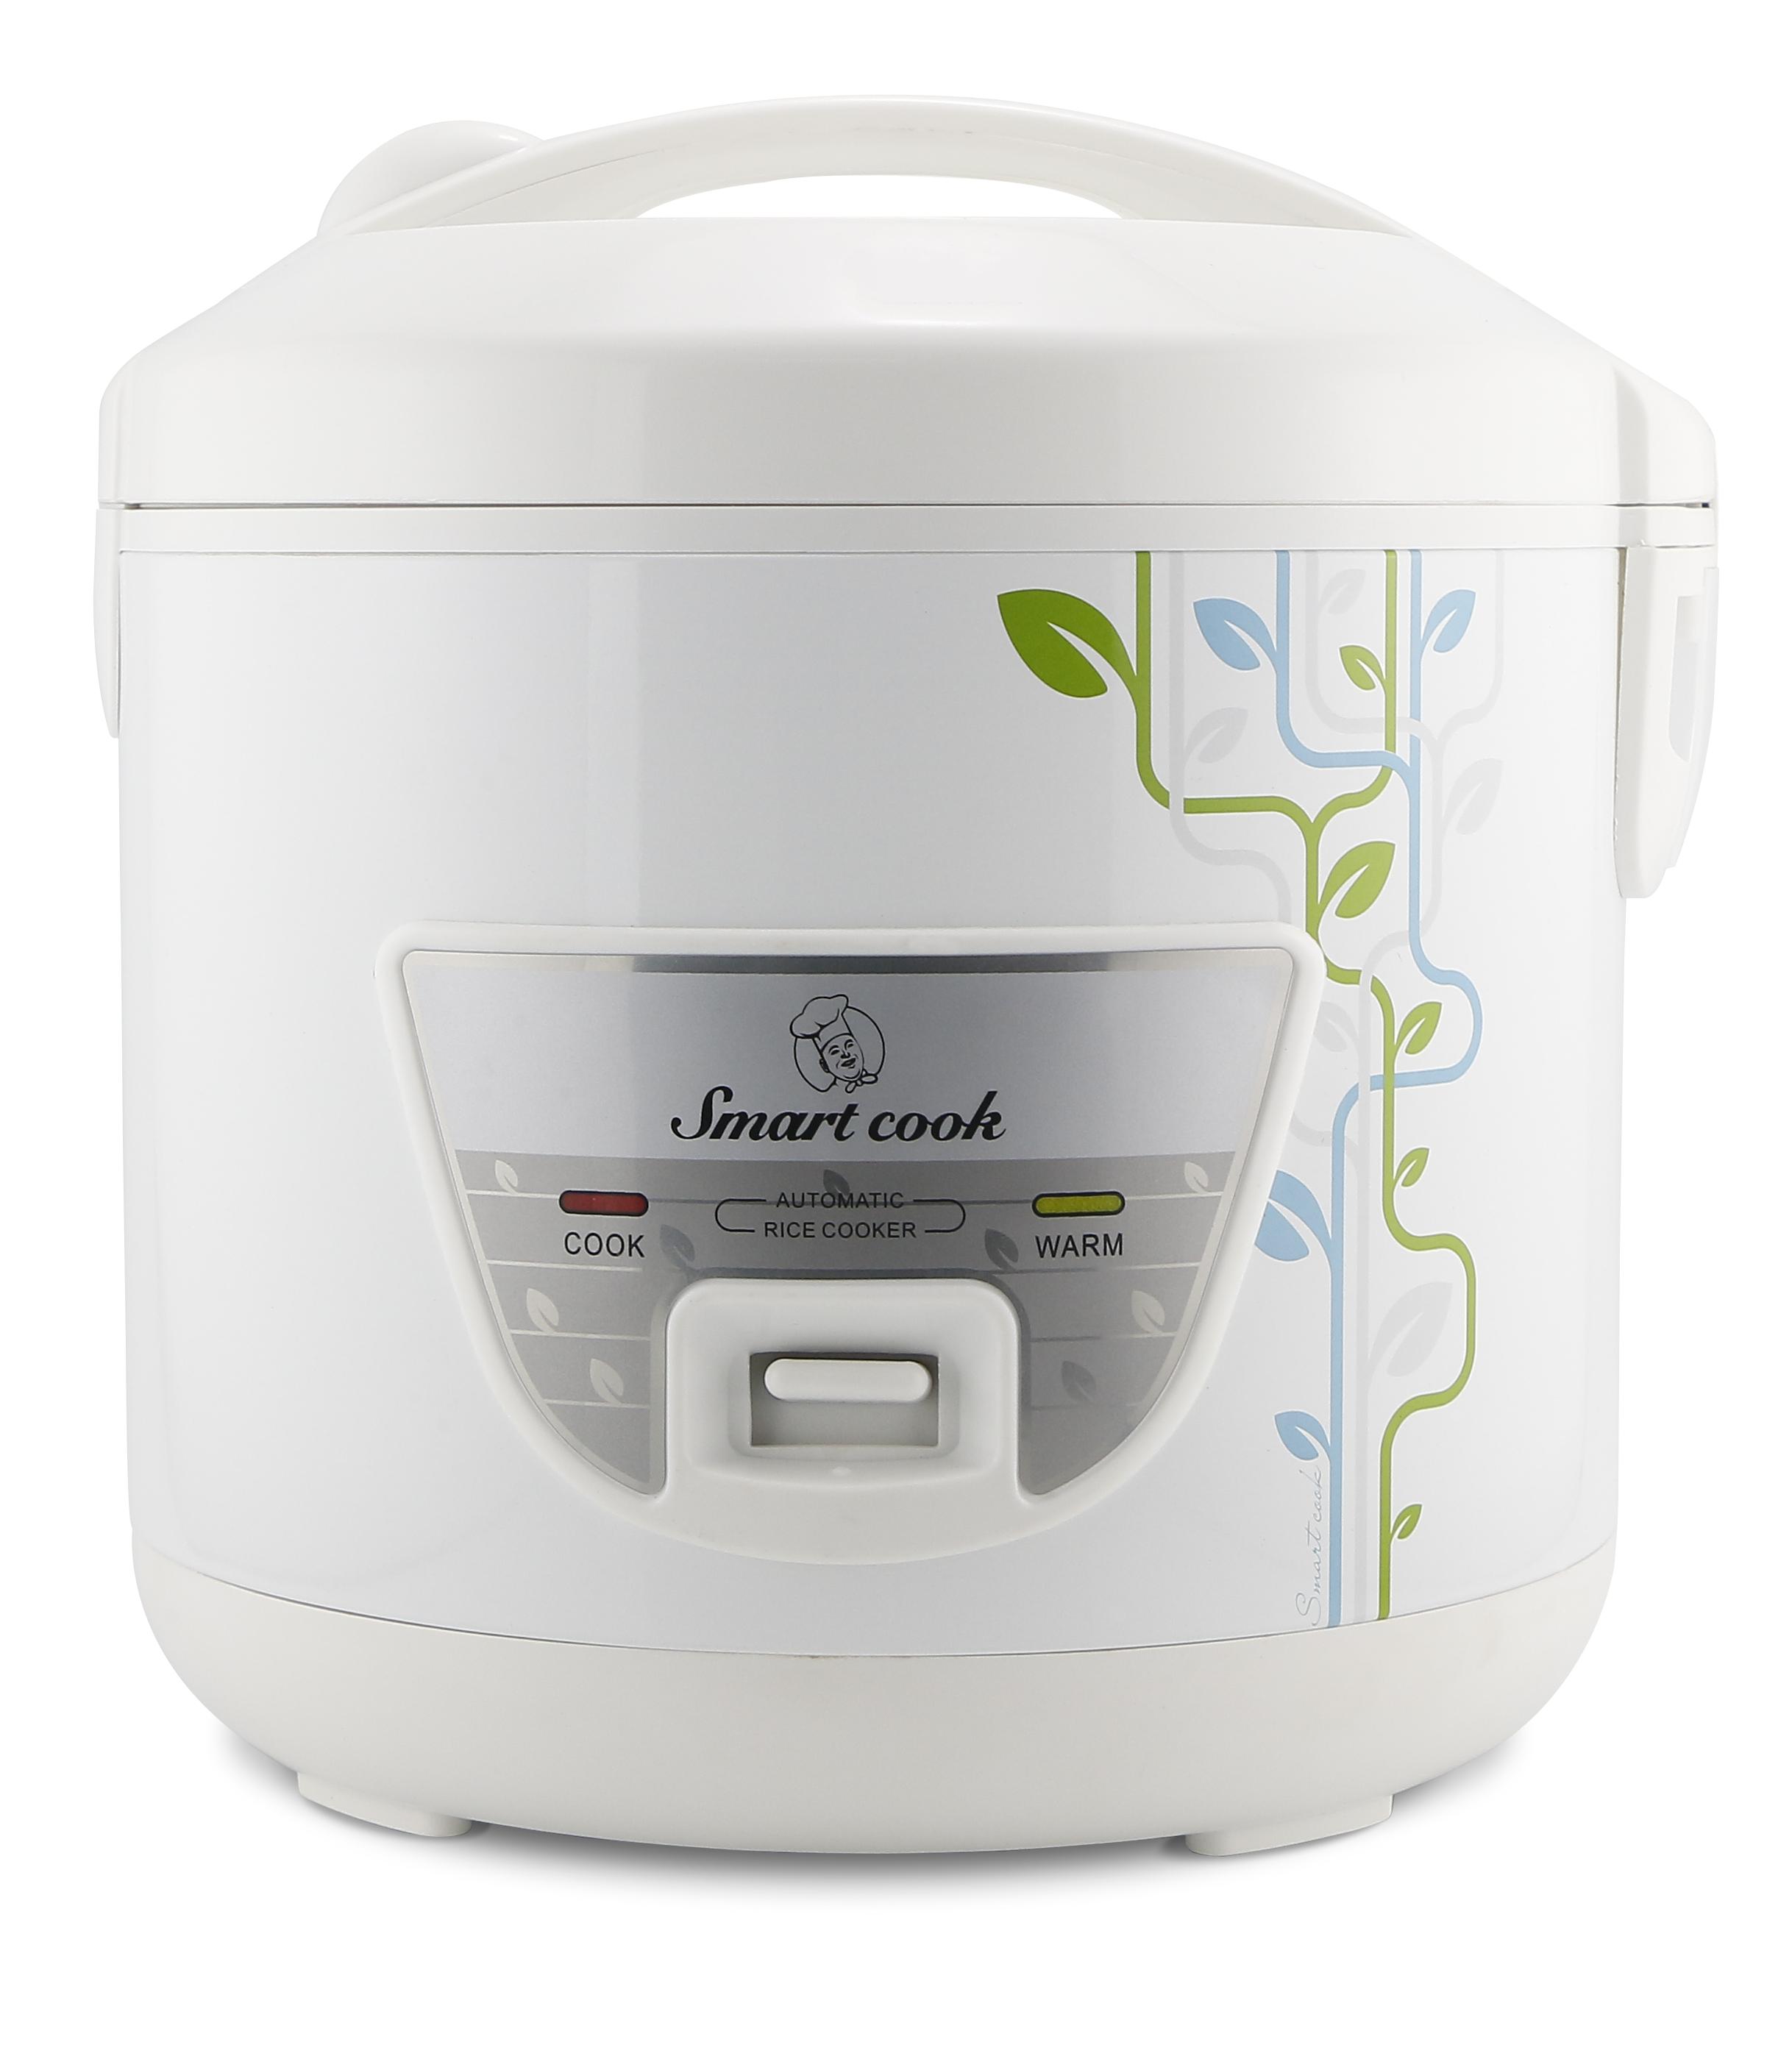 Smartcook 1.8L Electric Rice Cooker RCS -1788